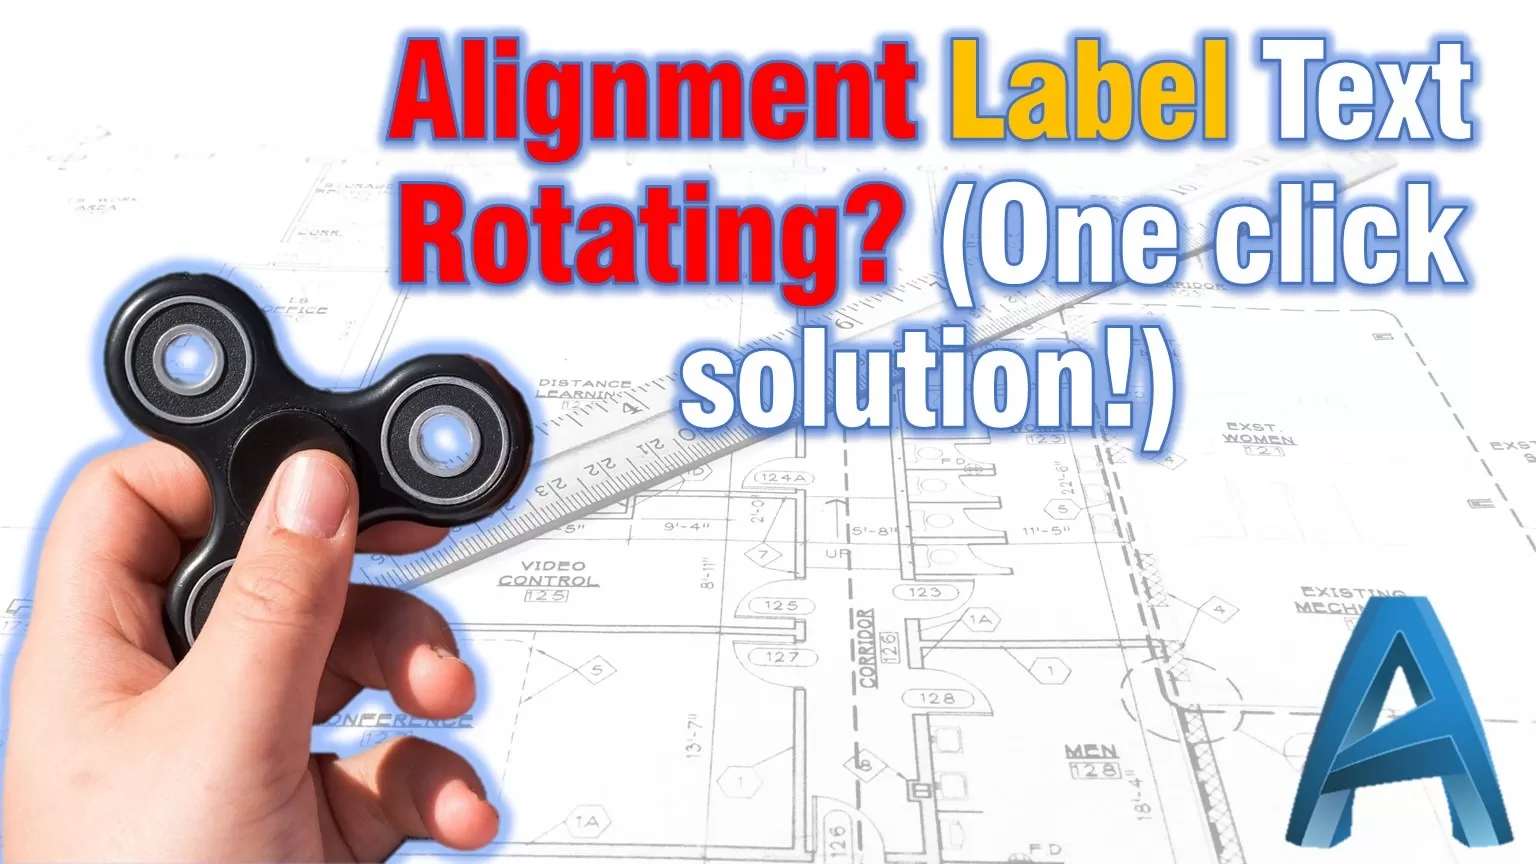 Stop alignment Label Text rotation and make it static!